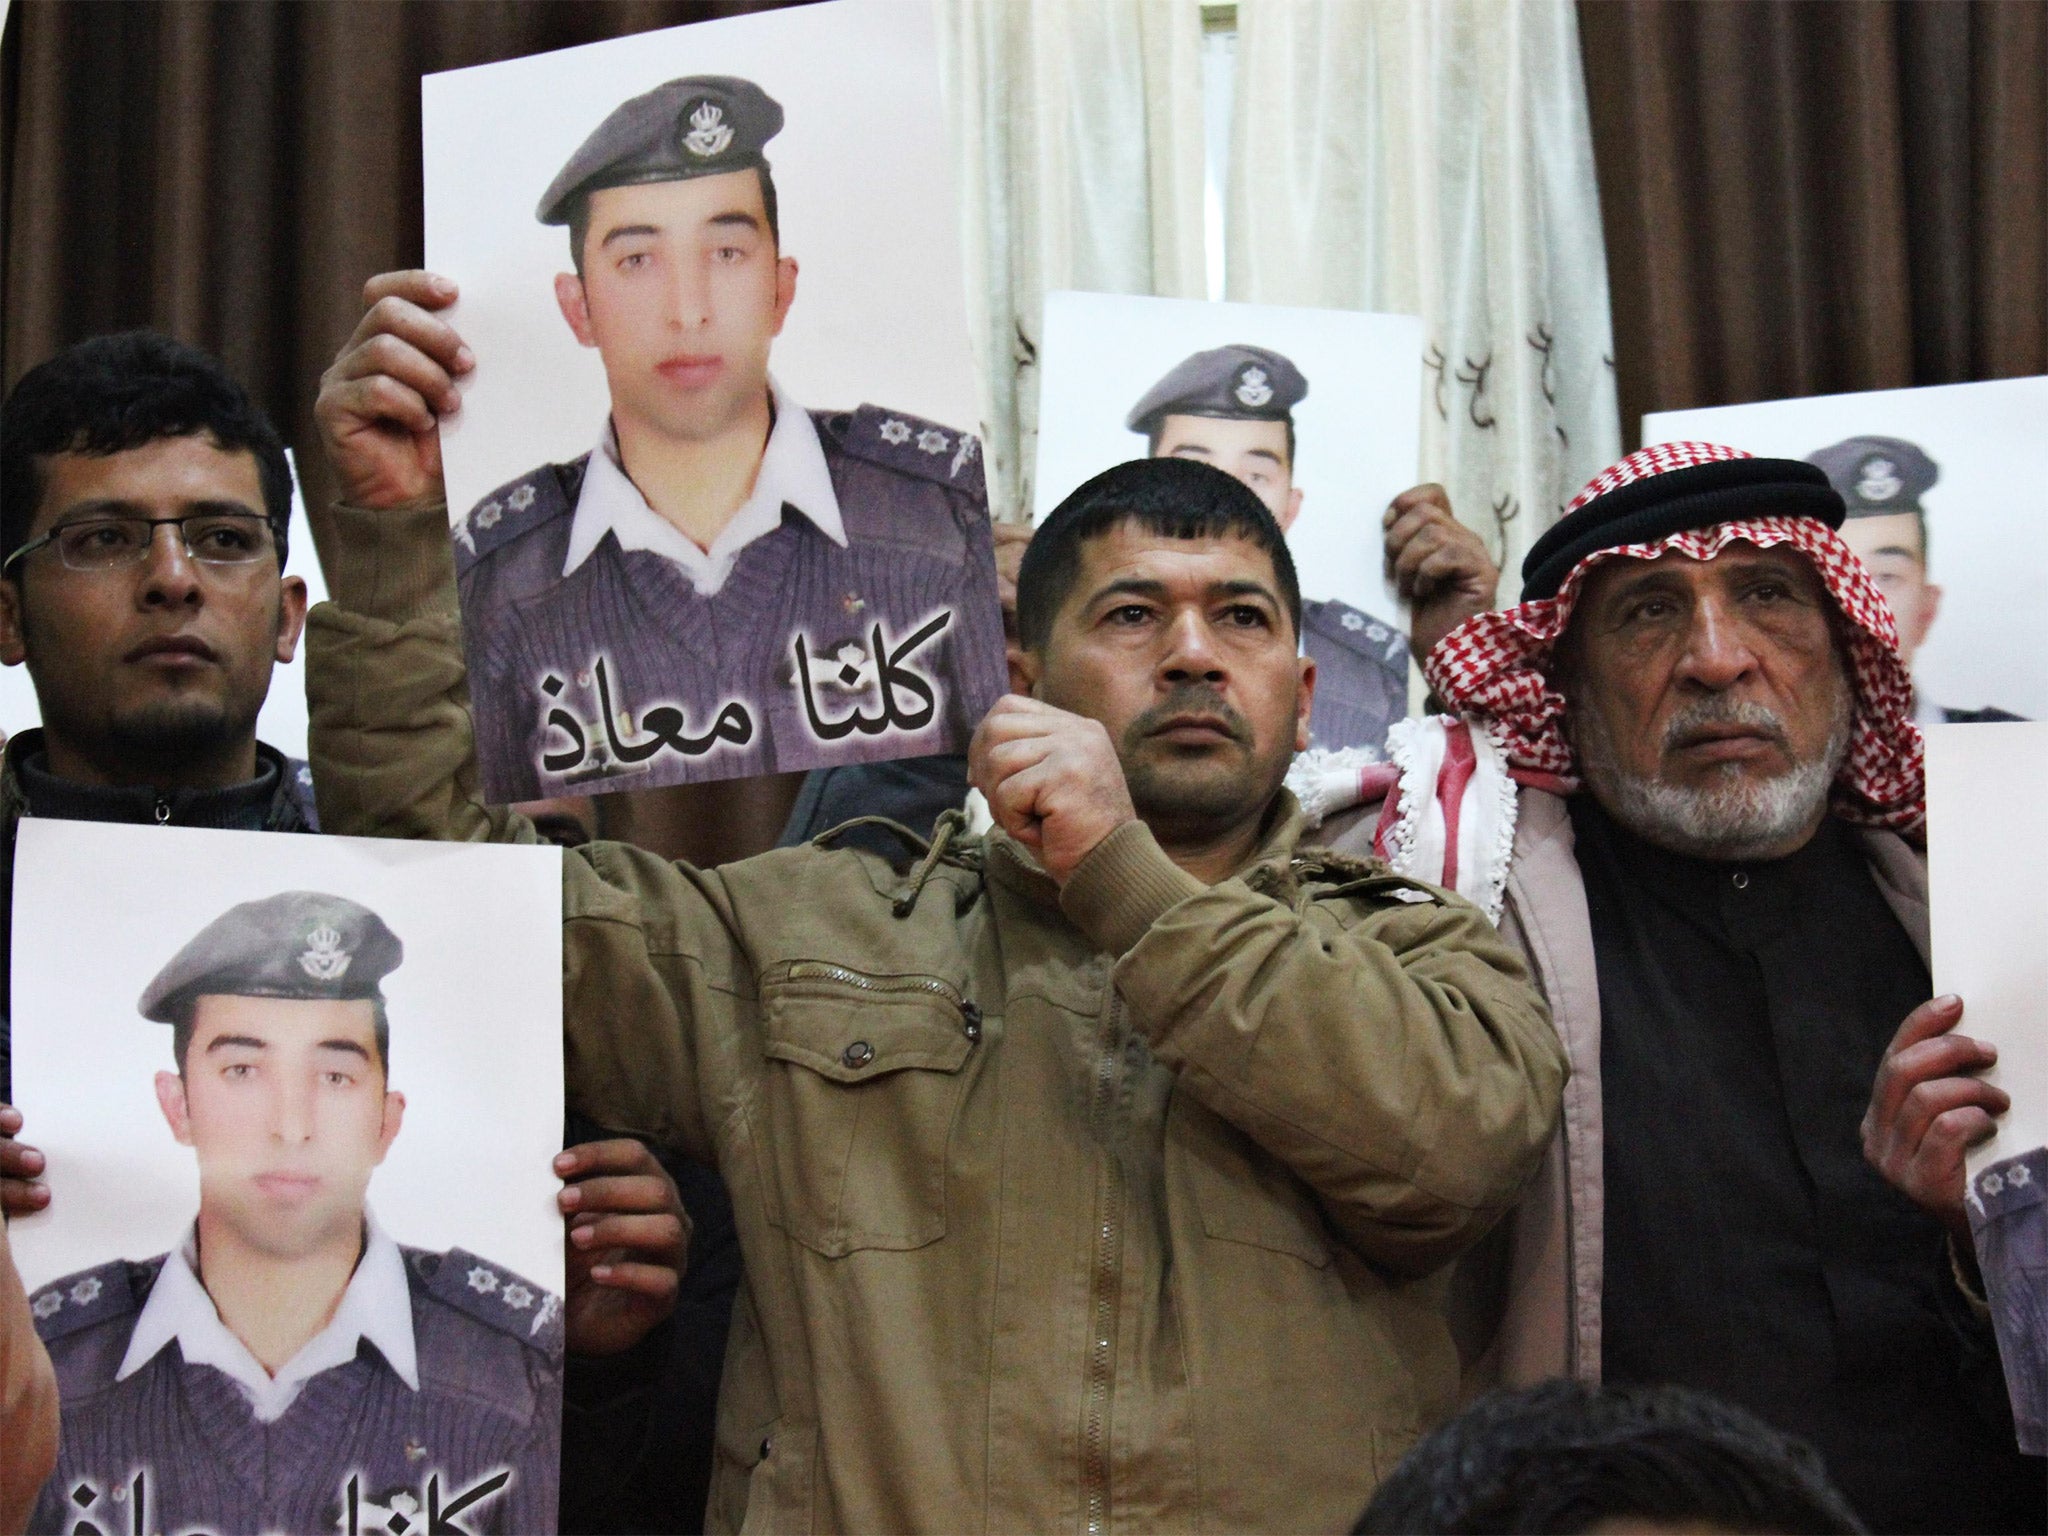 Relatives of Jordanian pilot Moazal al-Kasaesbeh hold his poster as they take part in a rally in his support at the family's headquarters in the city of Karak, last week